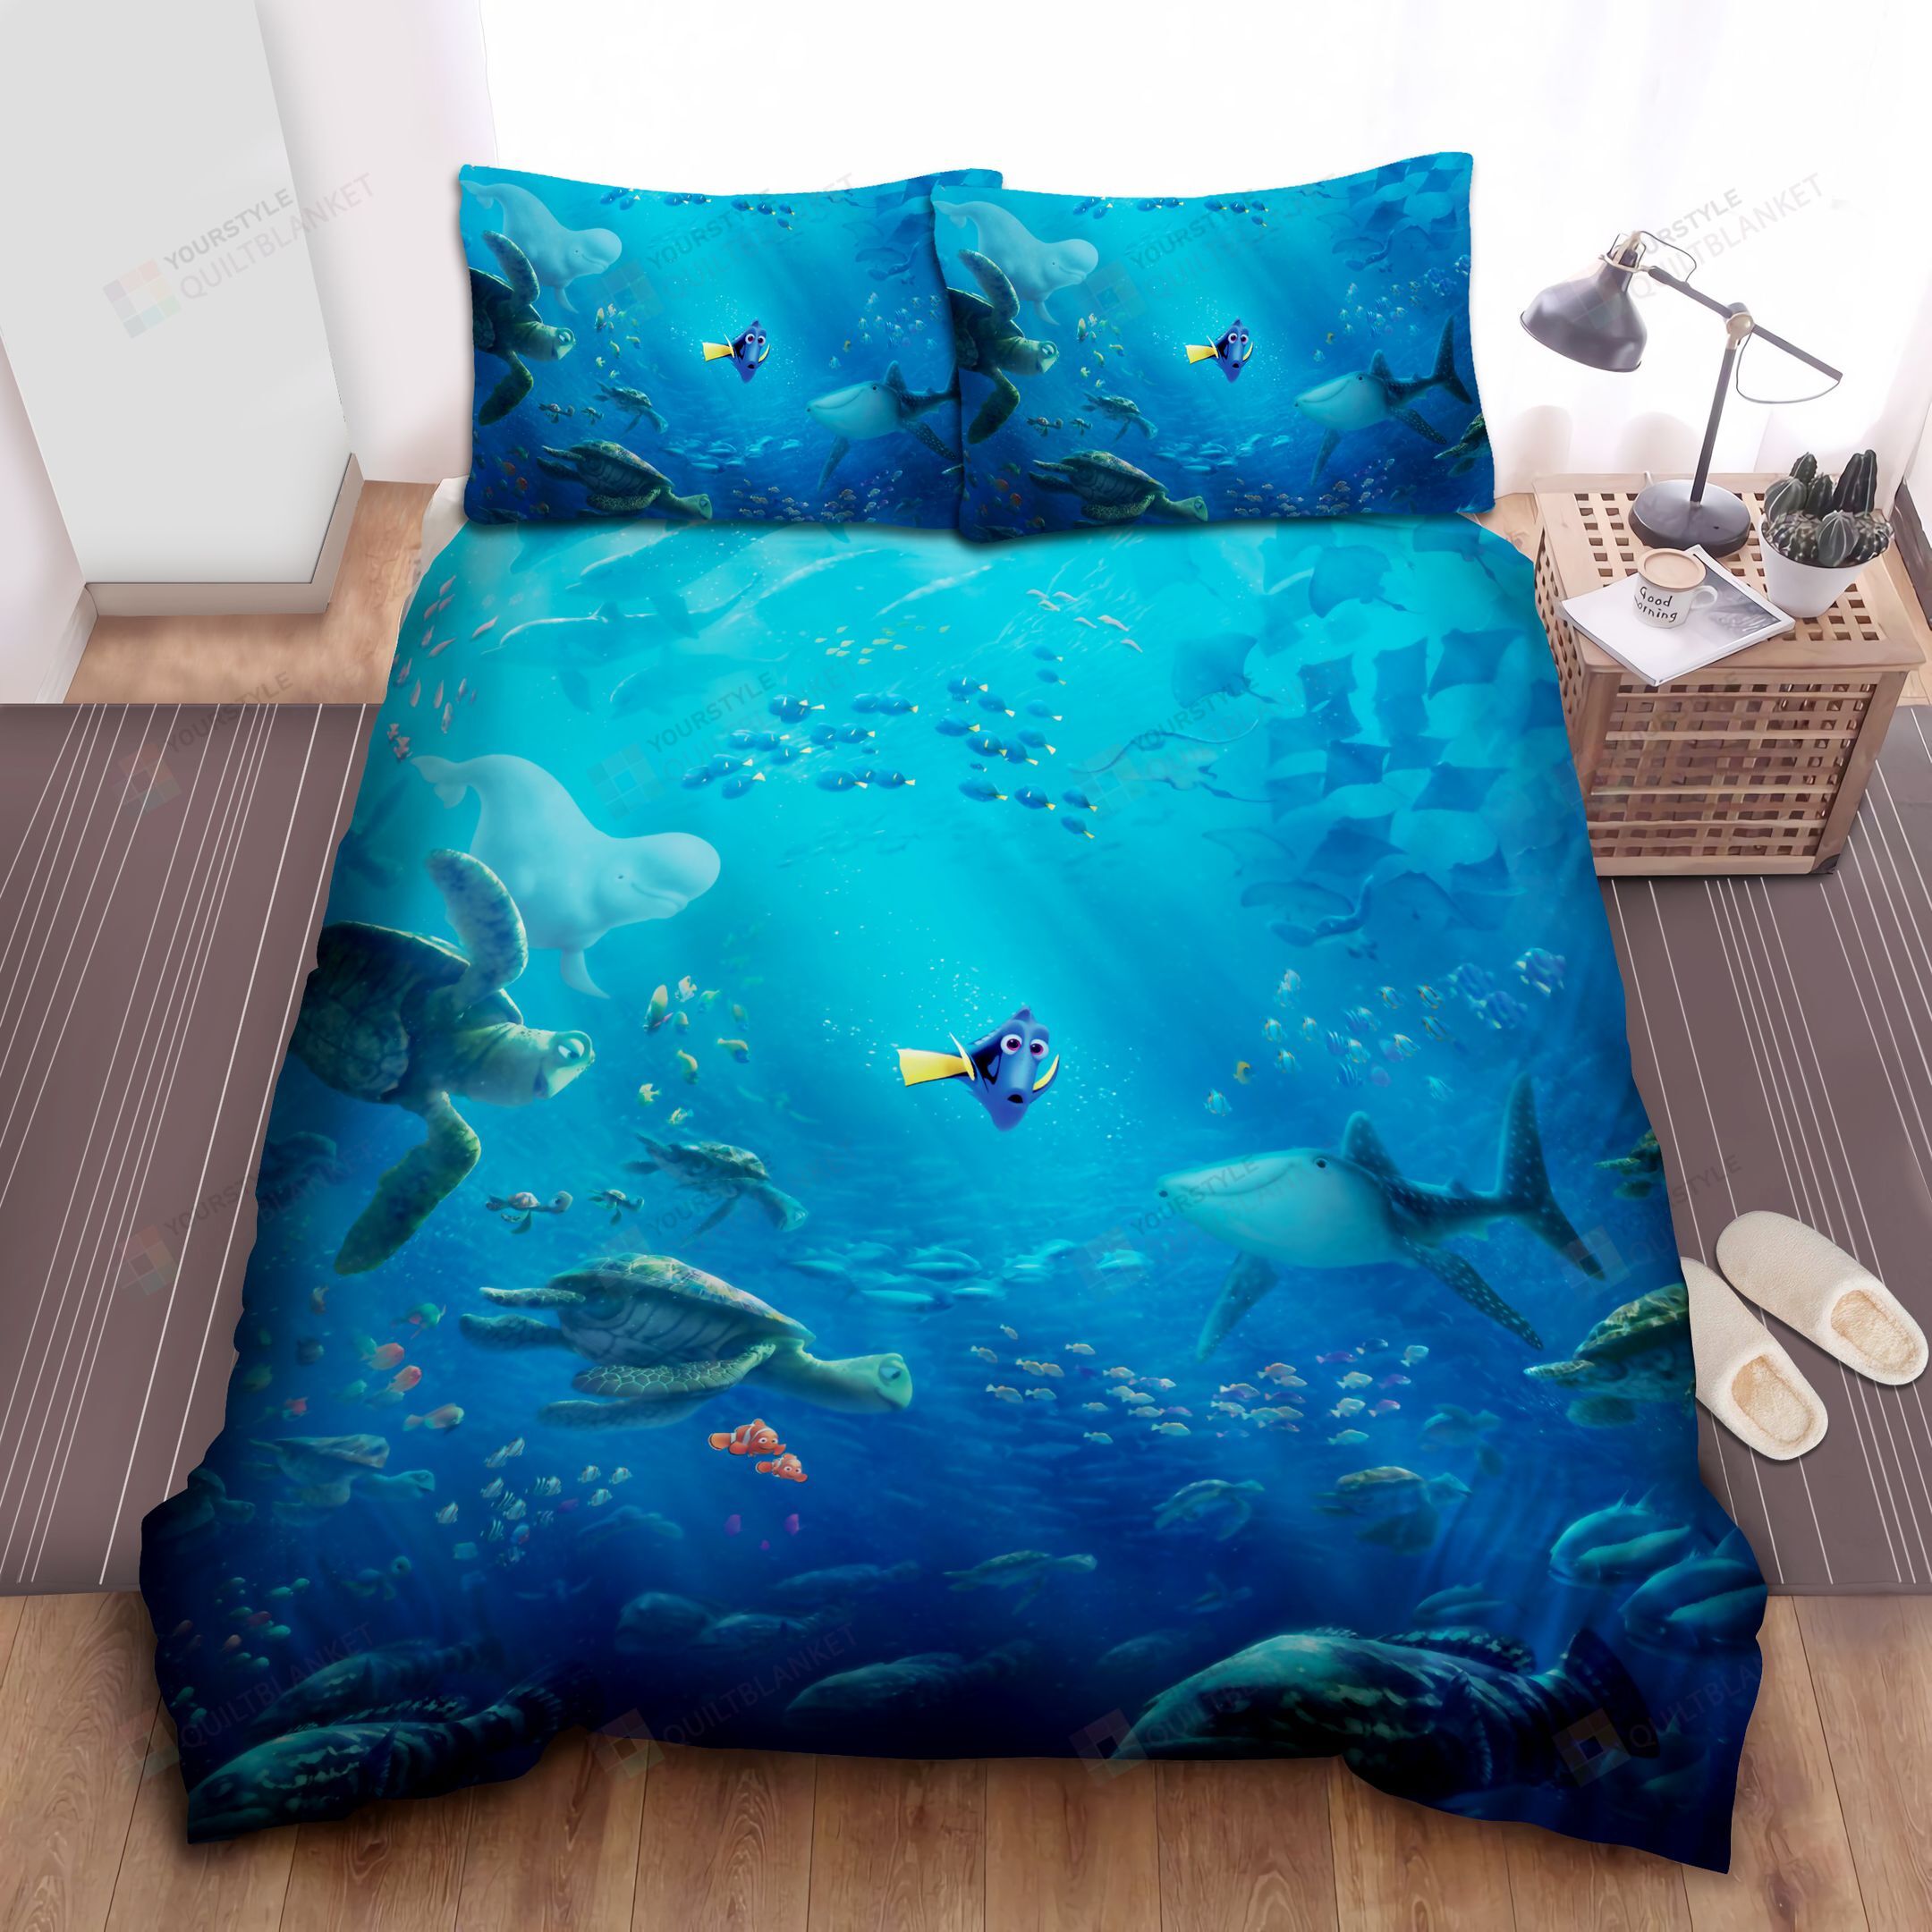 Nemo Marlin And Dory Lost In Huge Ocean Bed Sheets Spread Comforter Duvet Cover Bedding Sets